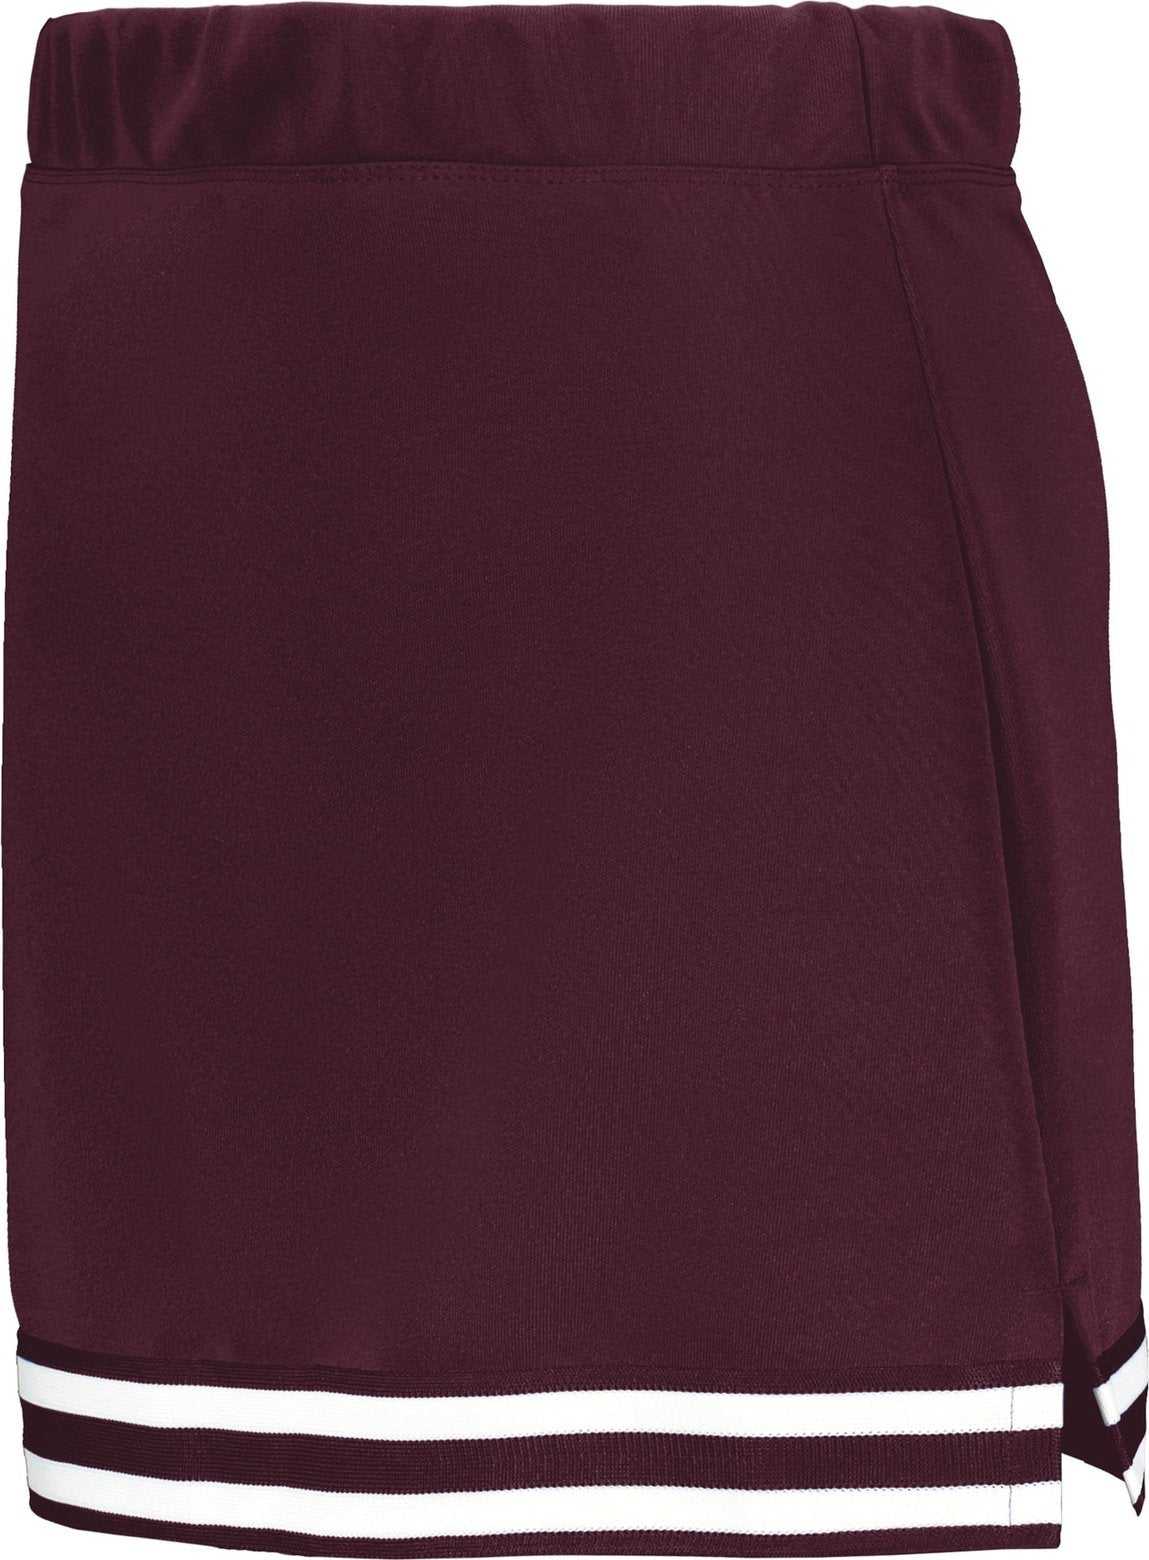 Augusta 6926 Girls Cheer Squad Skirt - Maroon Black White - HIT a Double